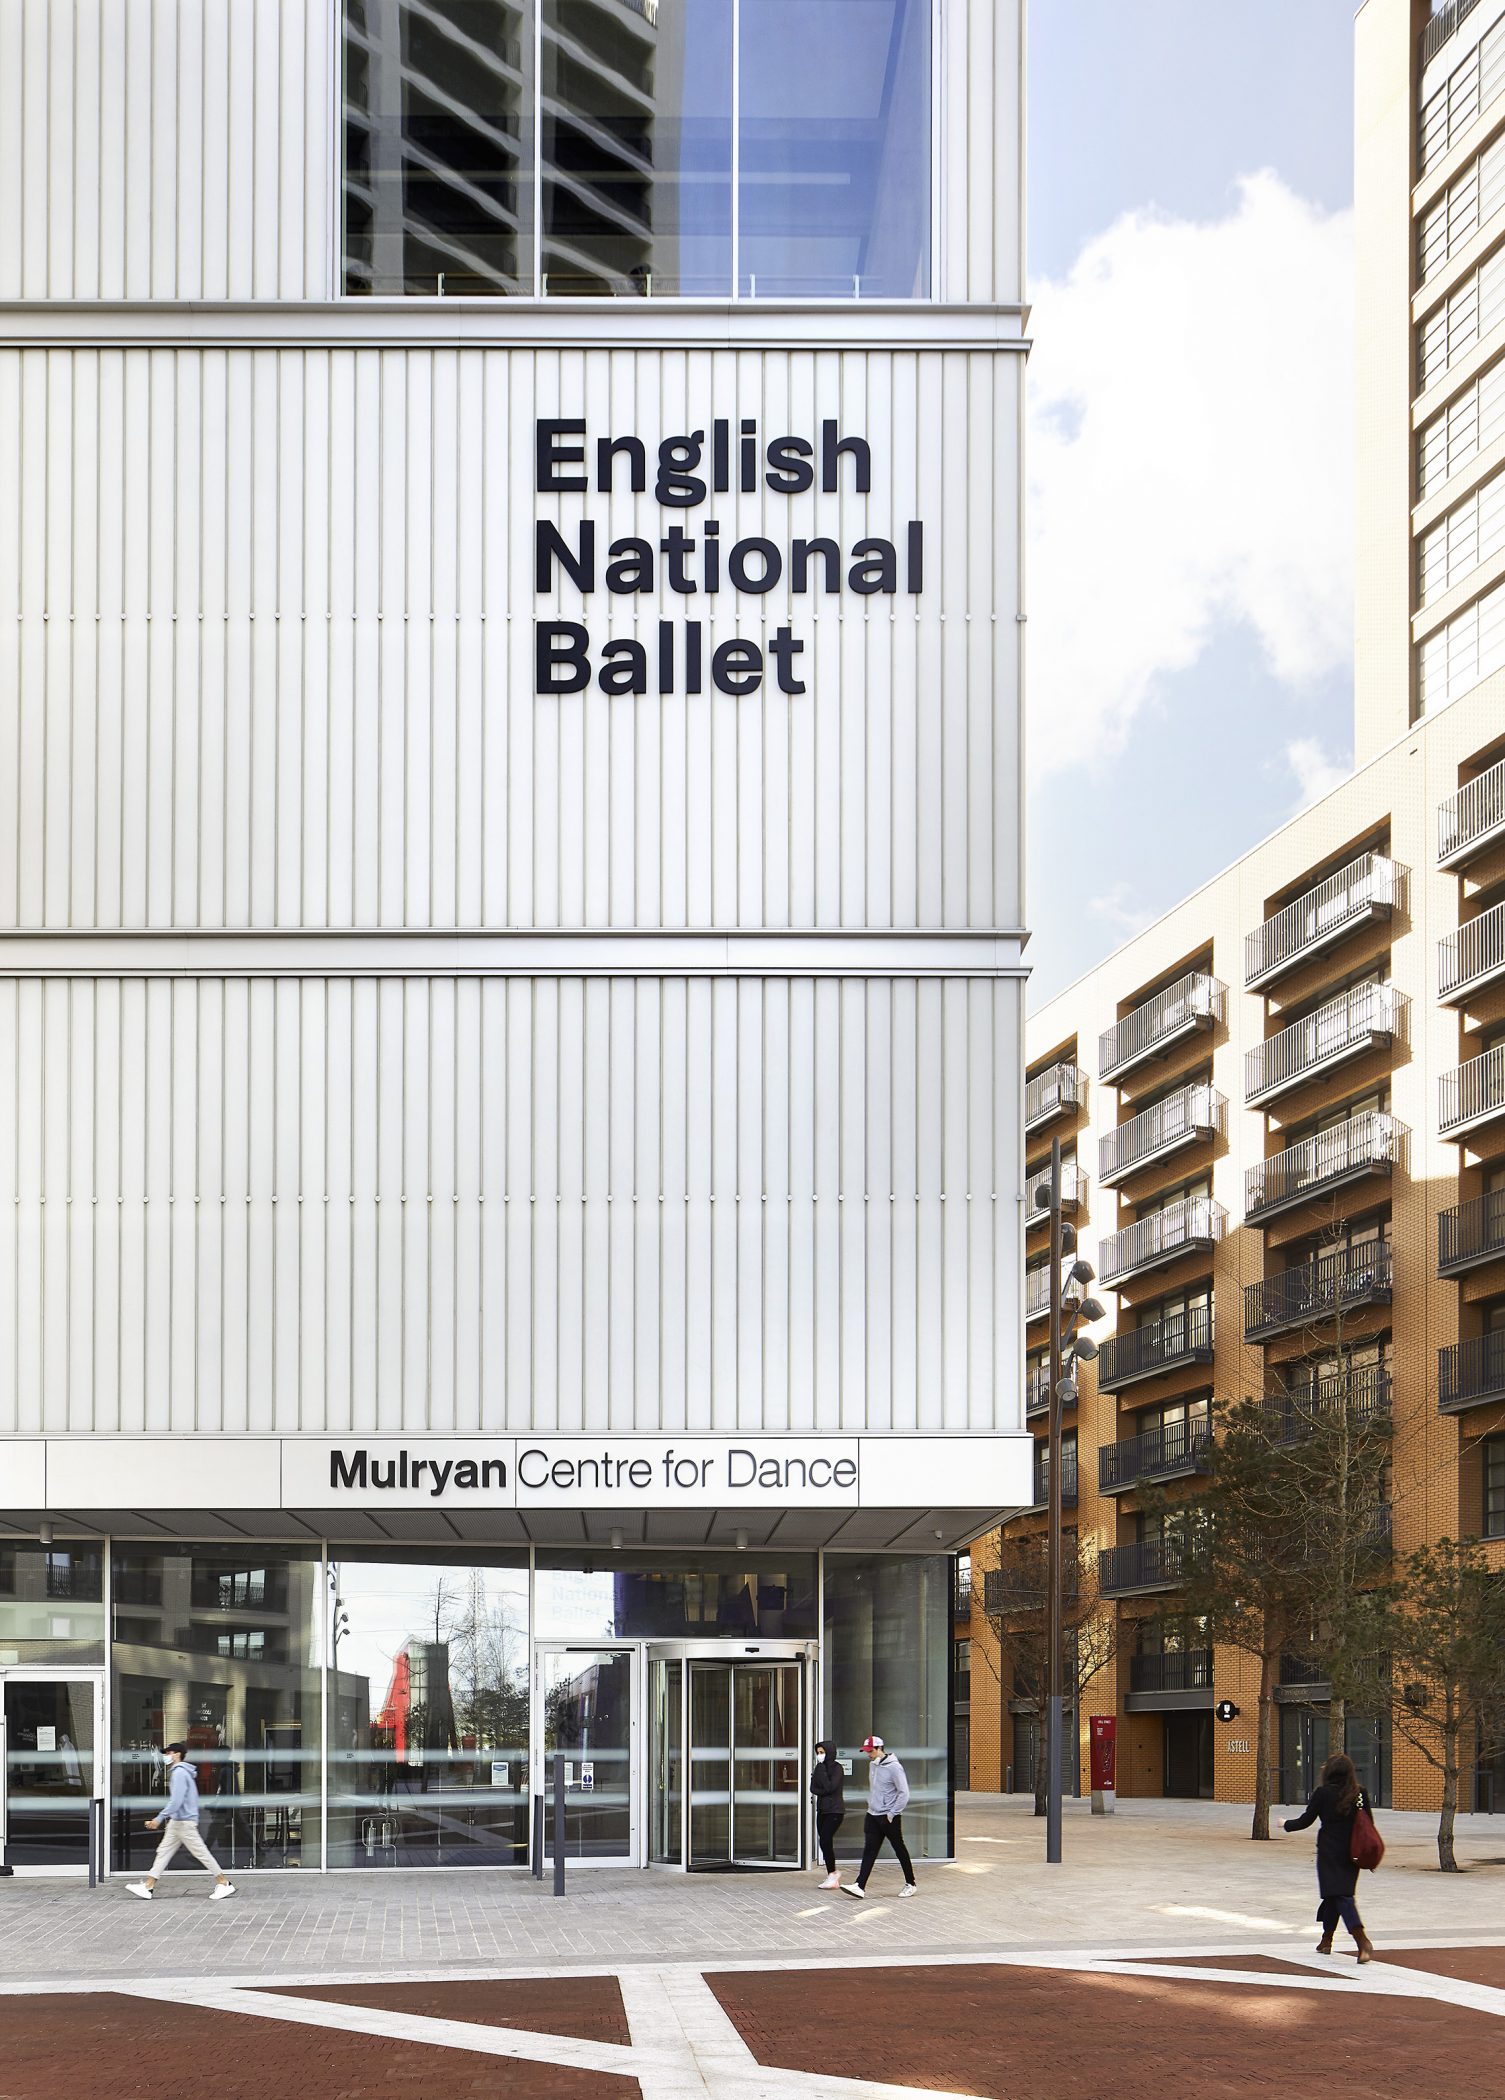 How to Get Here: Mulryan Centre for Dance | English National Ballet